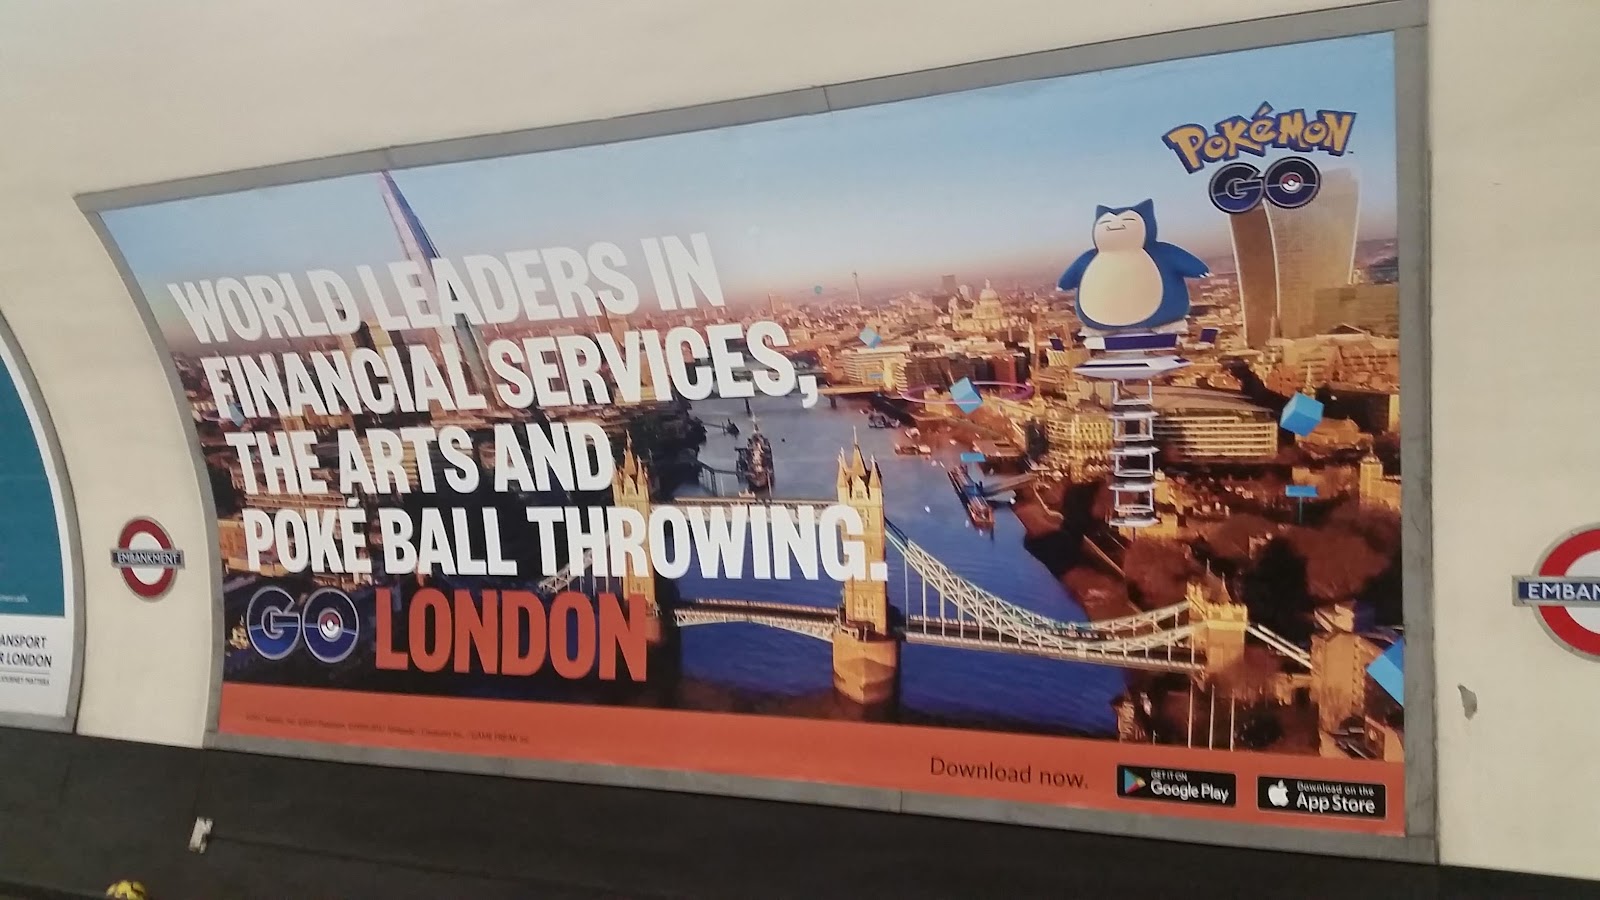 Pokemon GO's billboard in London's subway, with the text, "World leaders in financial services, the arts and Poke ball throwing. GO London"